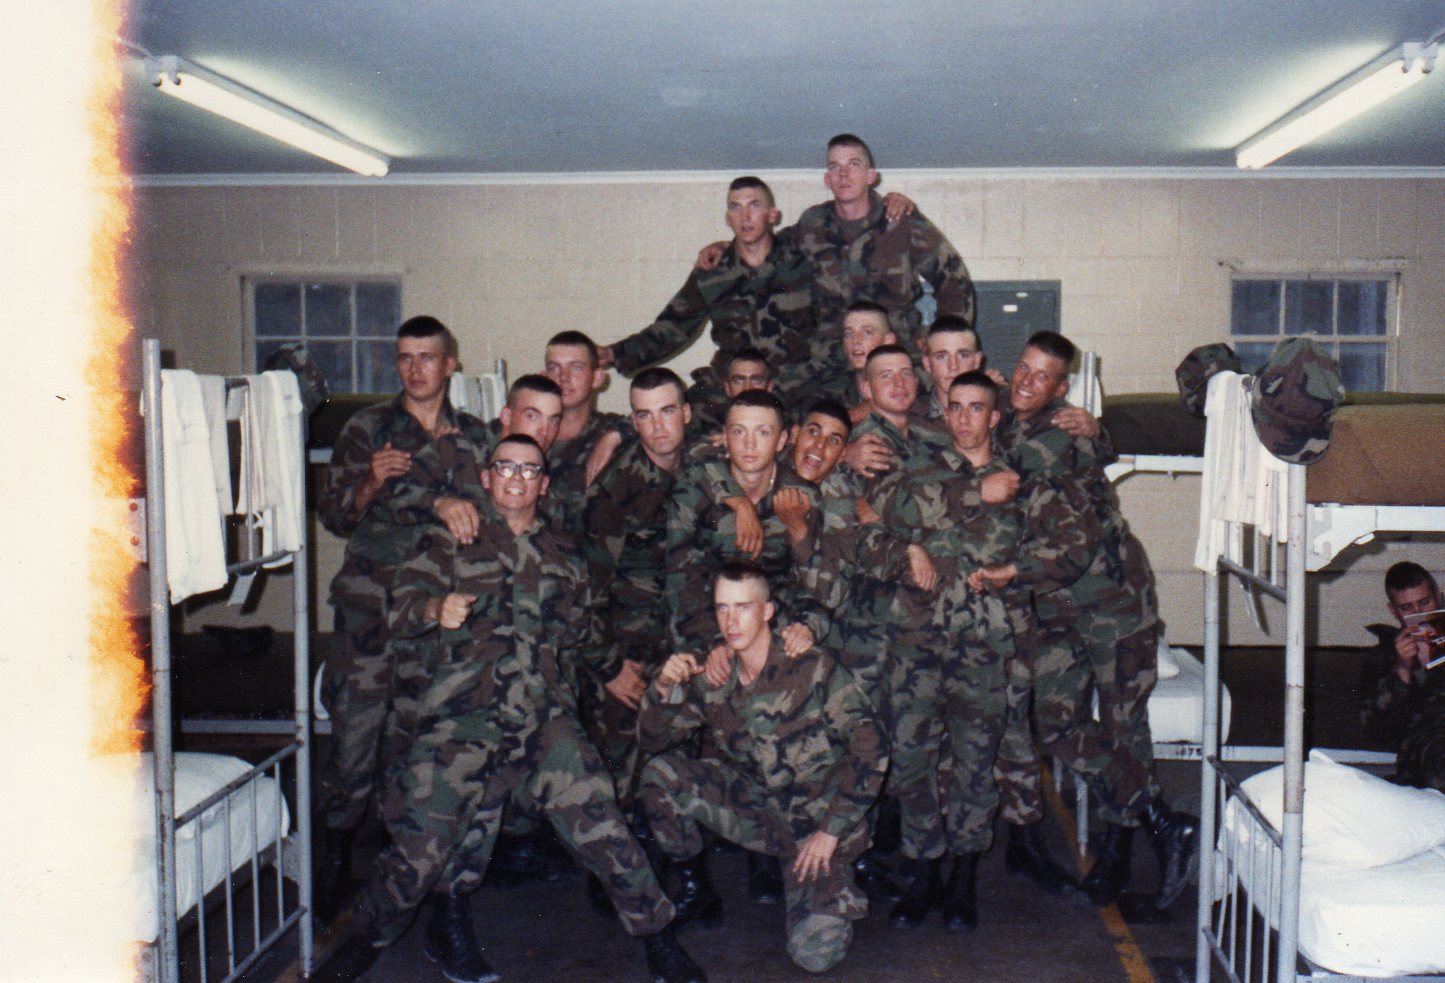 Part of SOI B Co. 1-88 0311 3rd Platoon Camp 